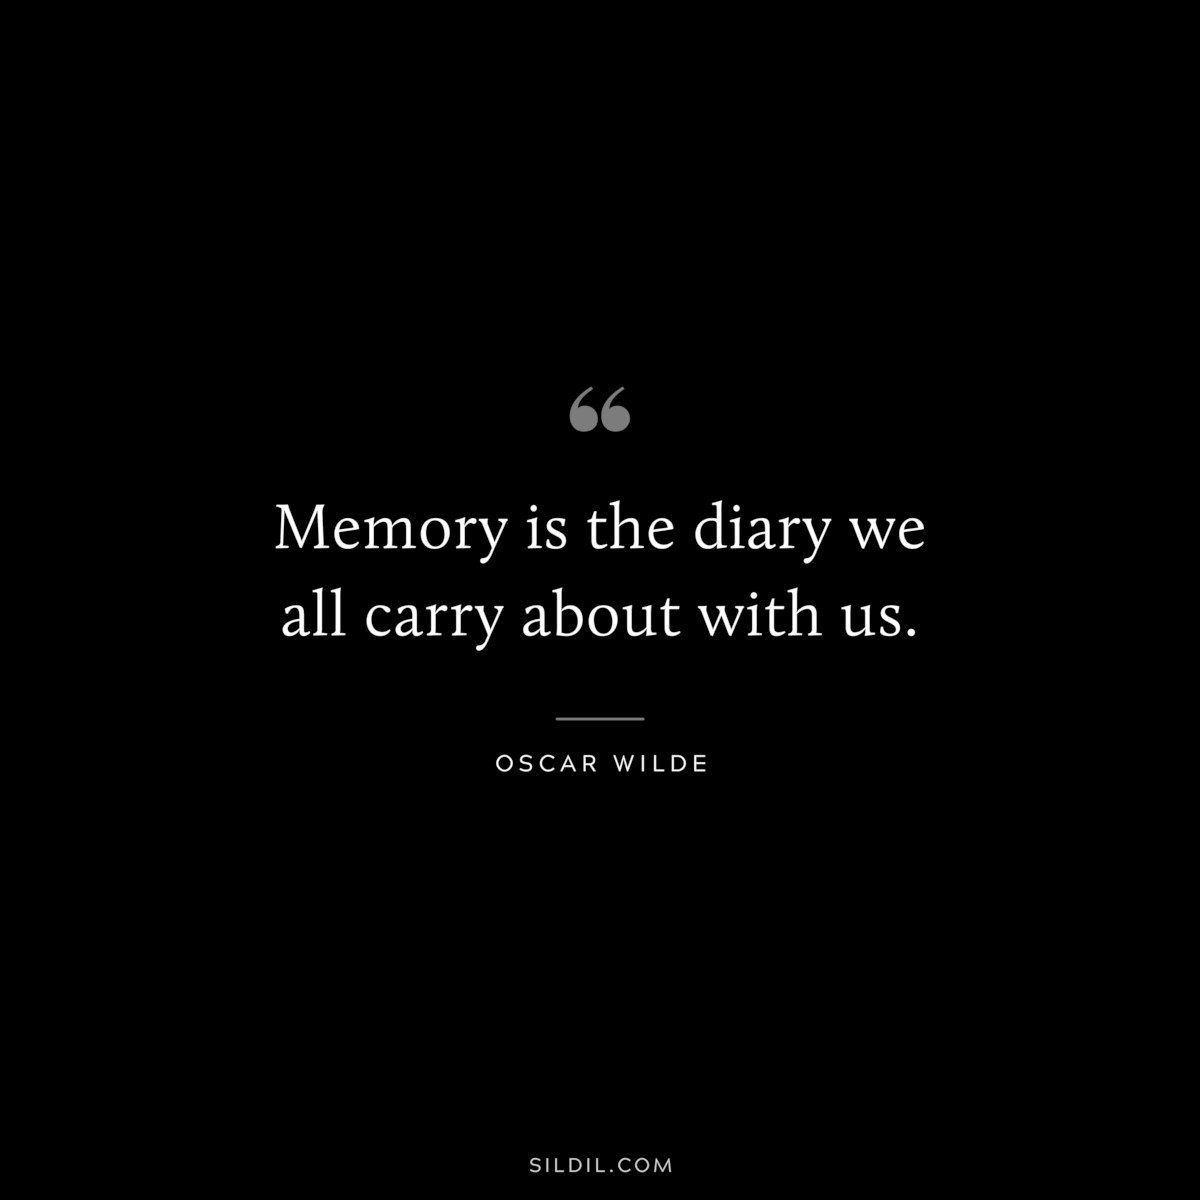 Memory is the diary we all carry about with us. ― Oscar Wilde